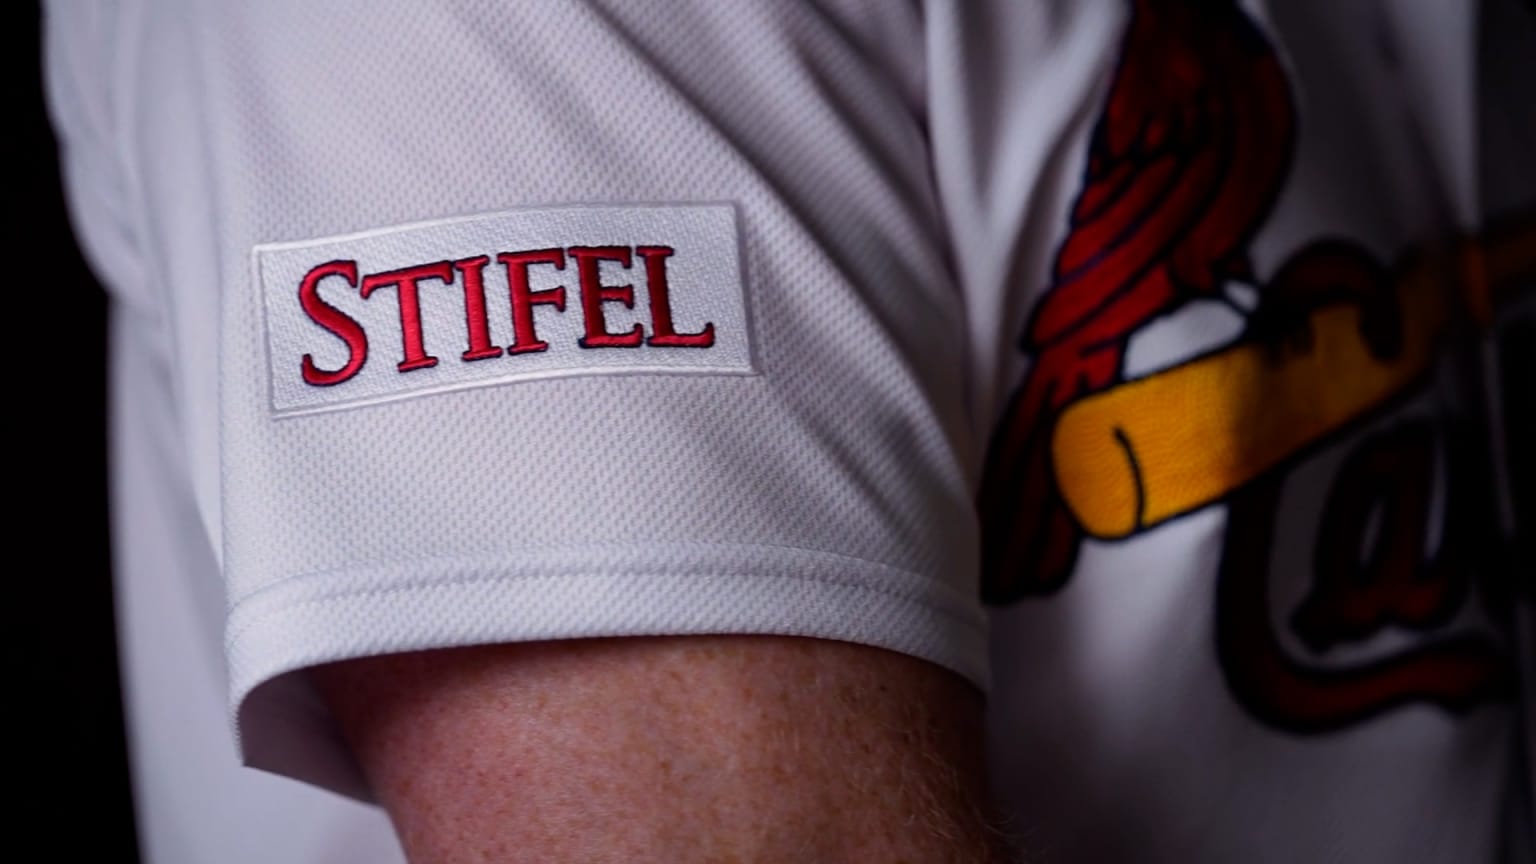 Cardinals announce seven-year partnership for jersey patches with